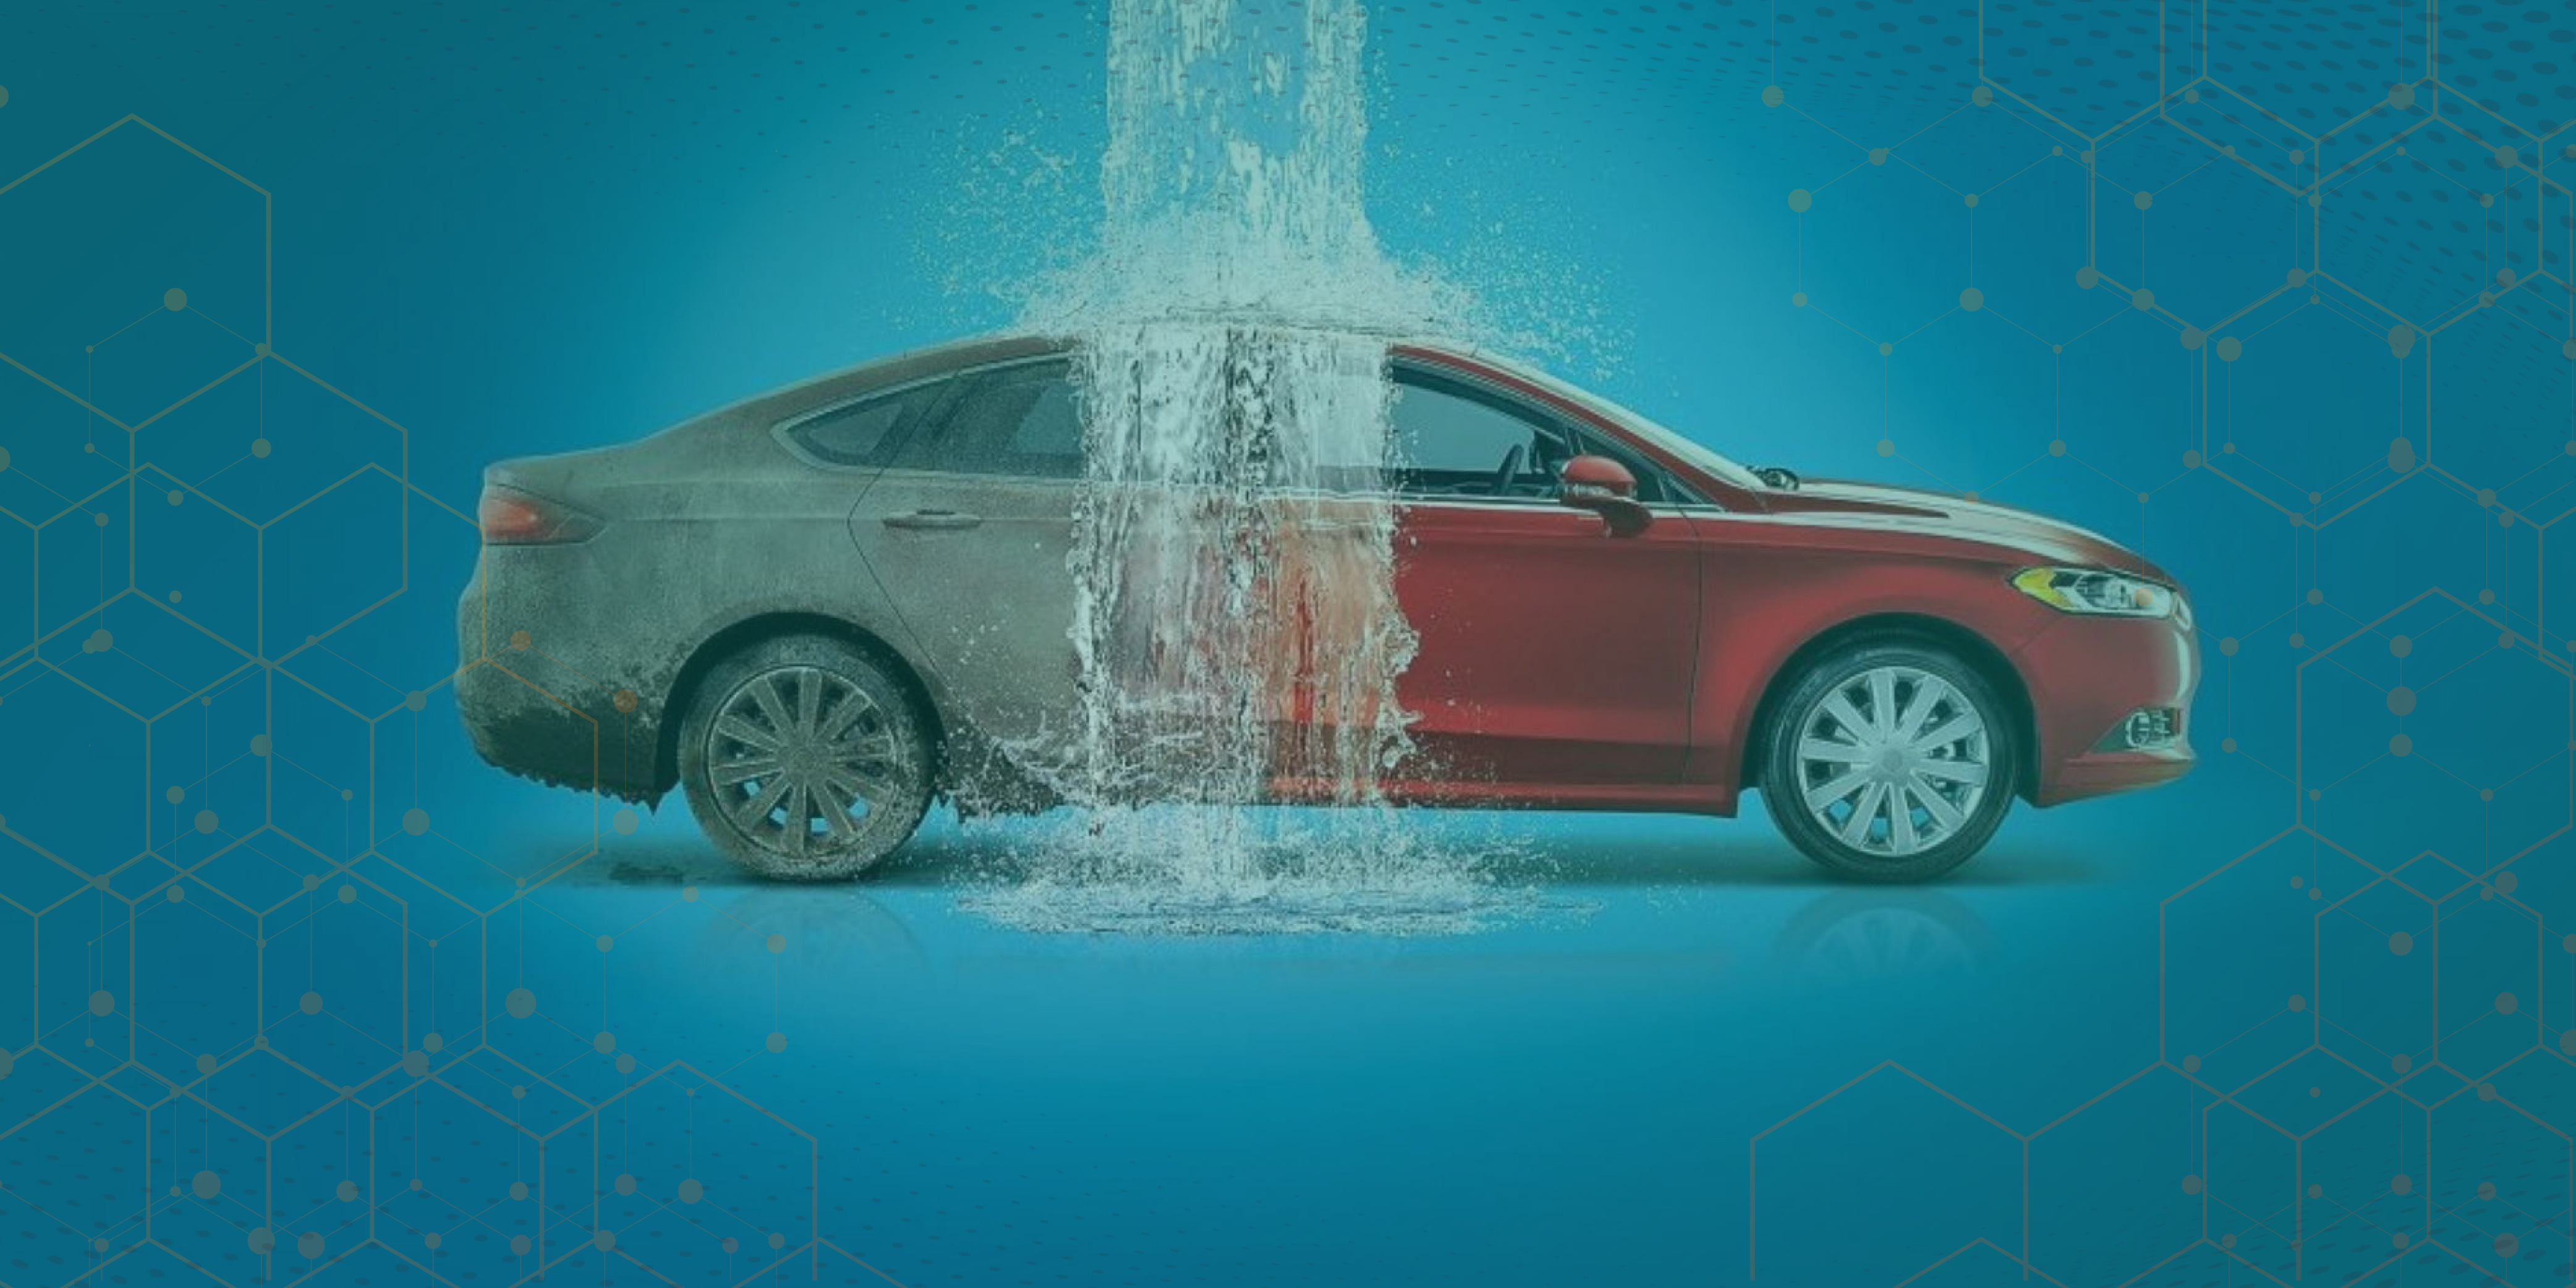 Benefits of an On-Demand Car Wash App